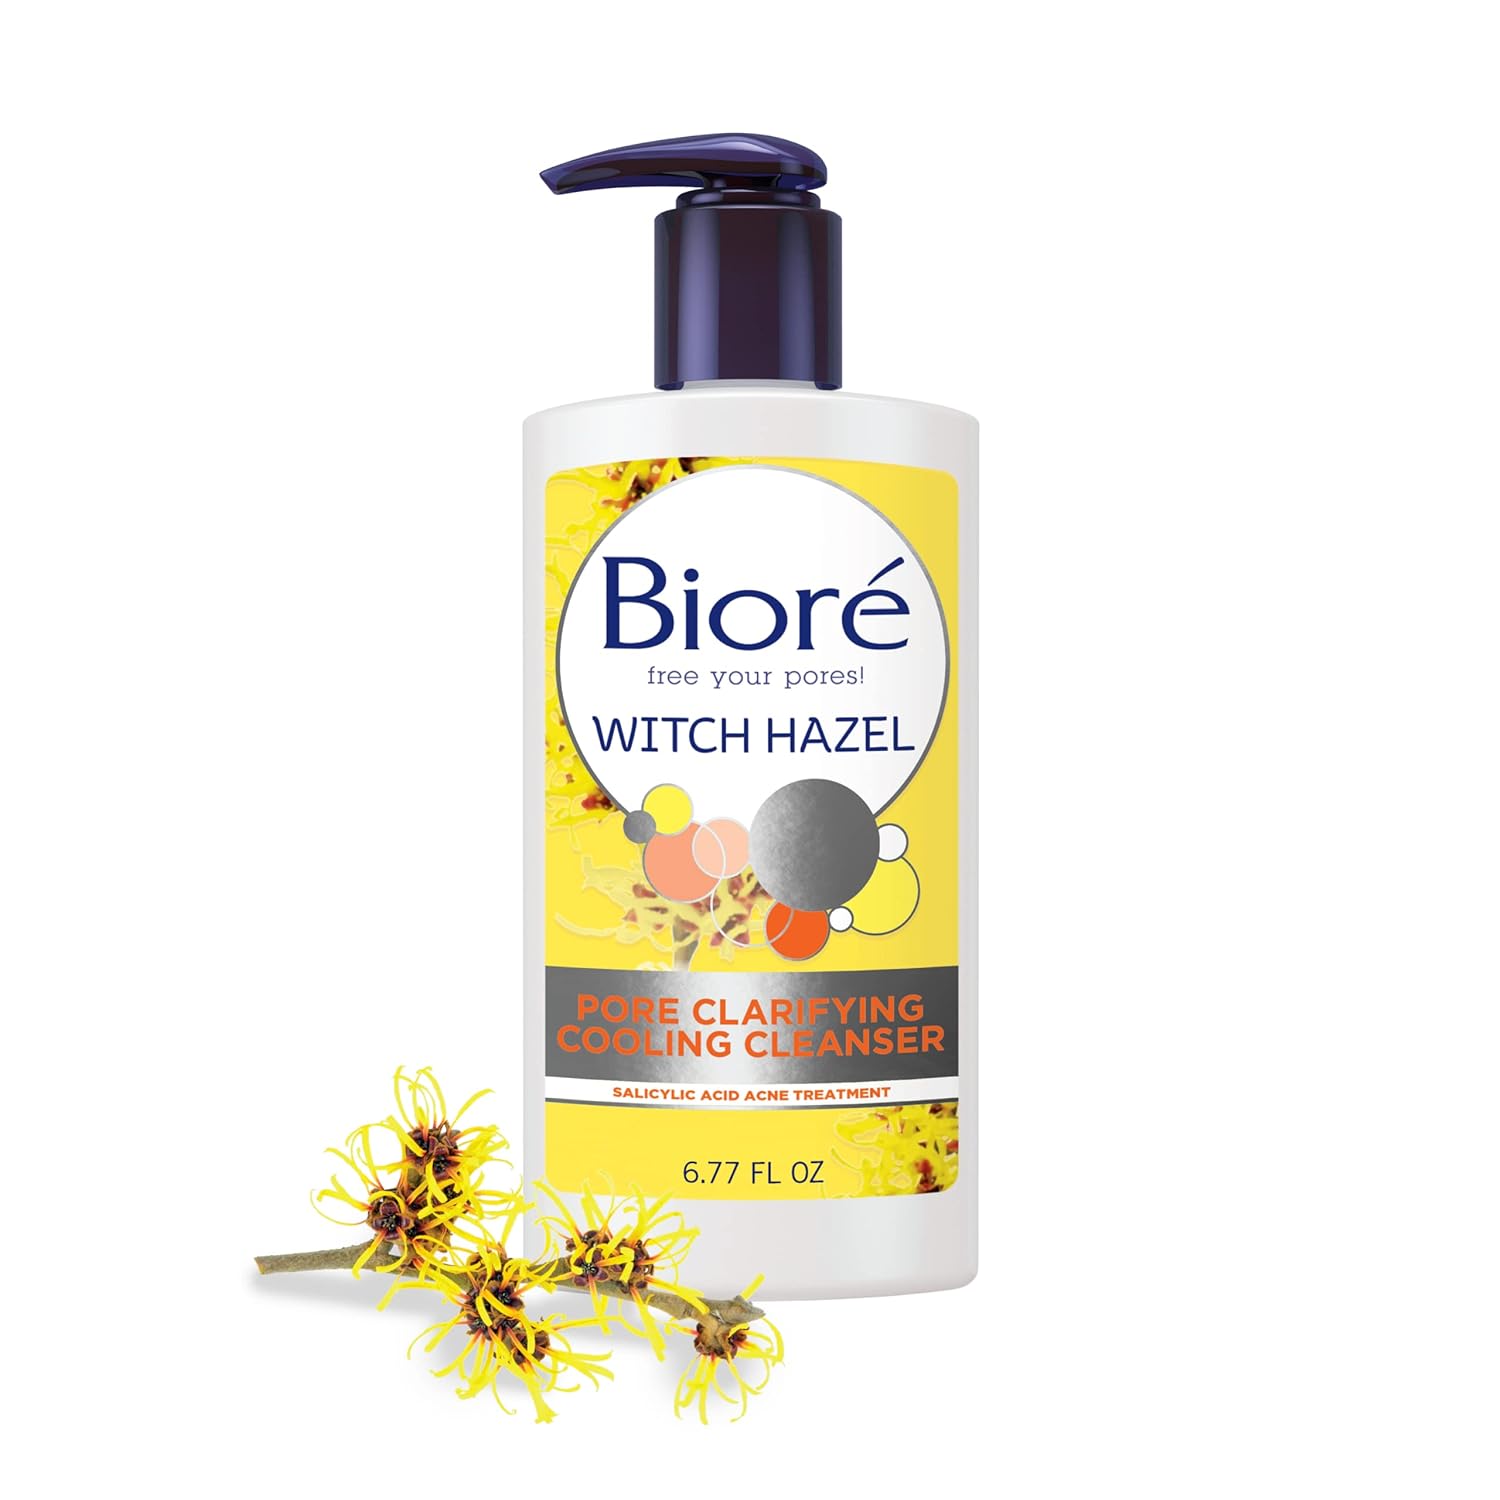 BIORE Free Your Pores Witch Hazel Pore Clarifying Cooling Cleanser Salicylic Acid Acne Treatment